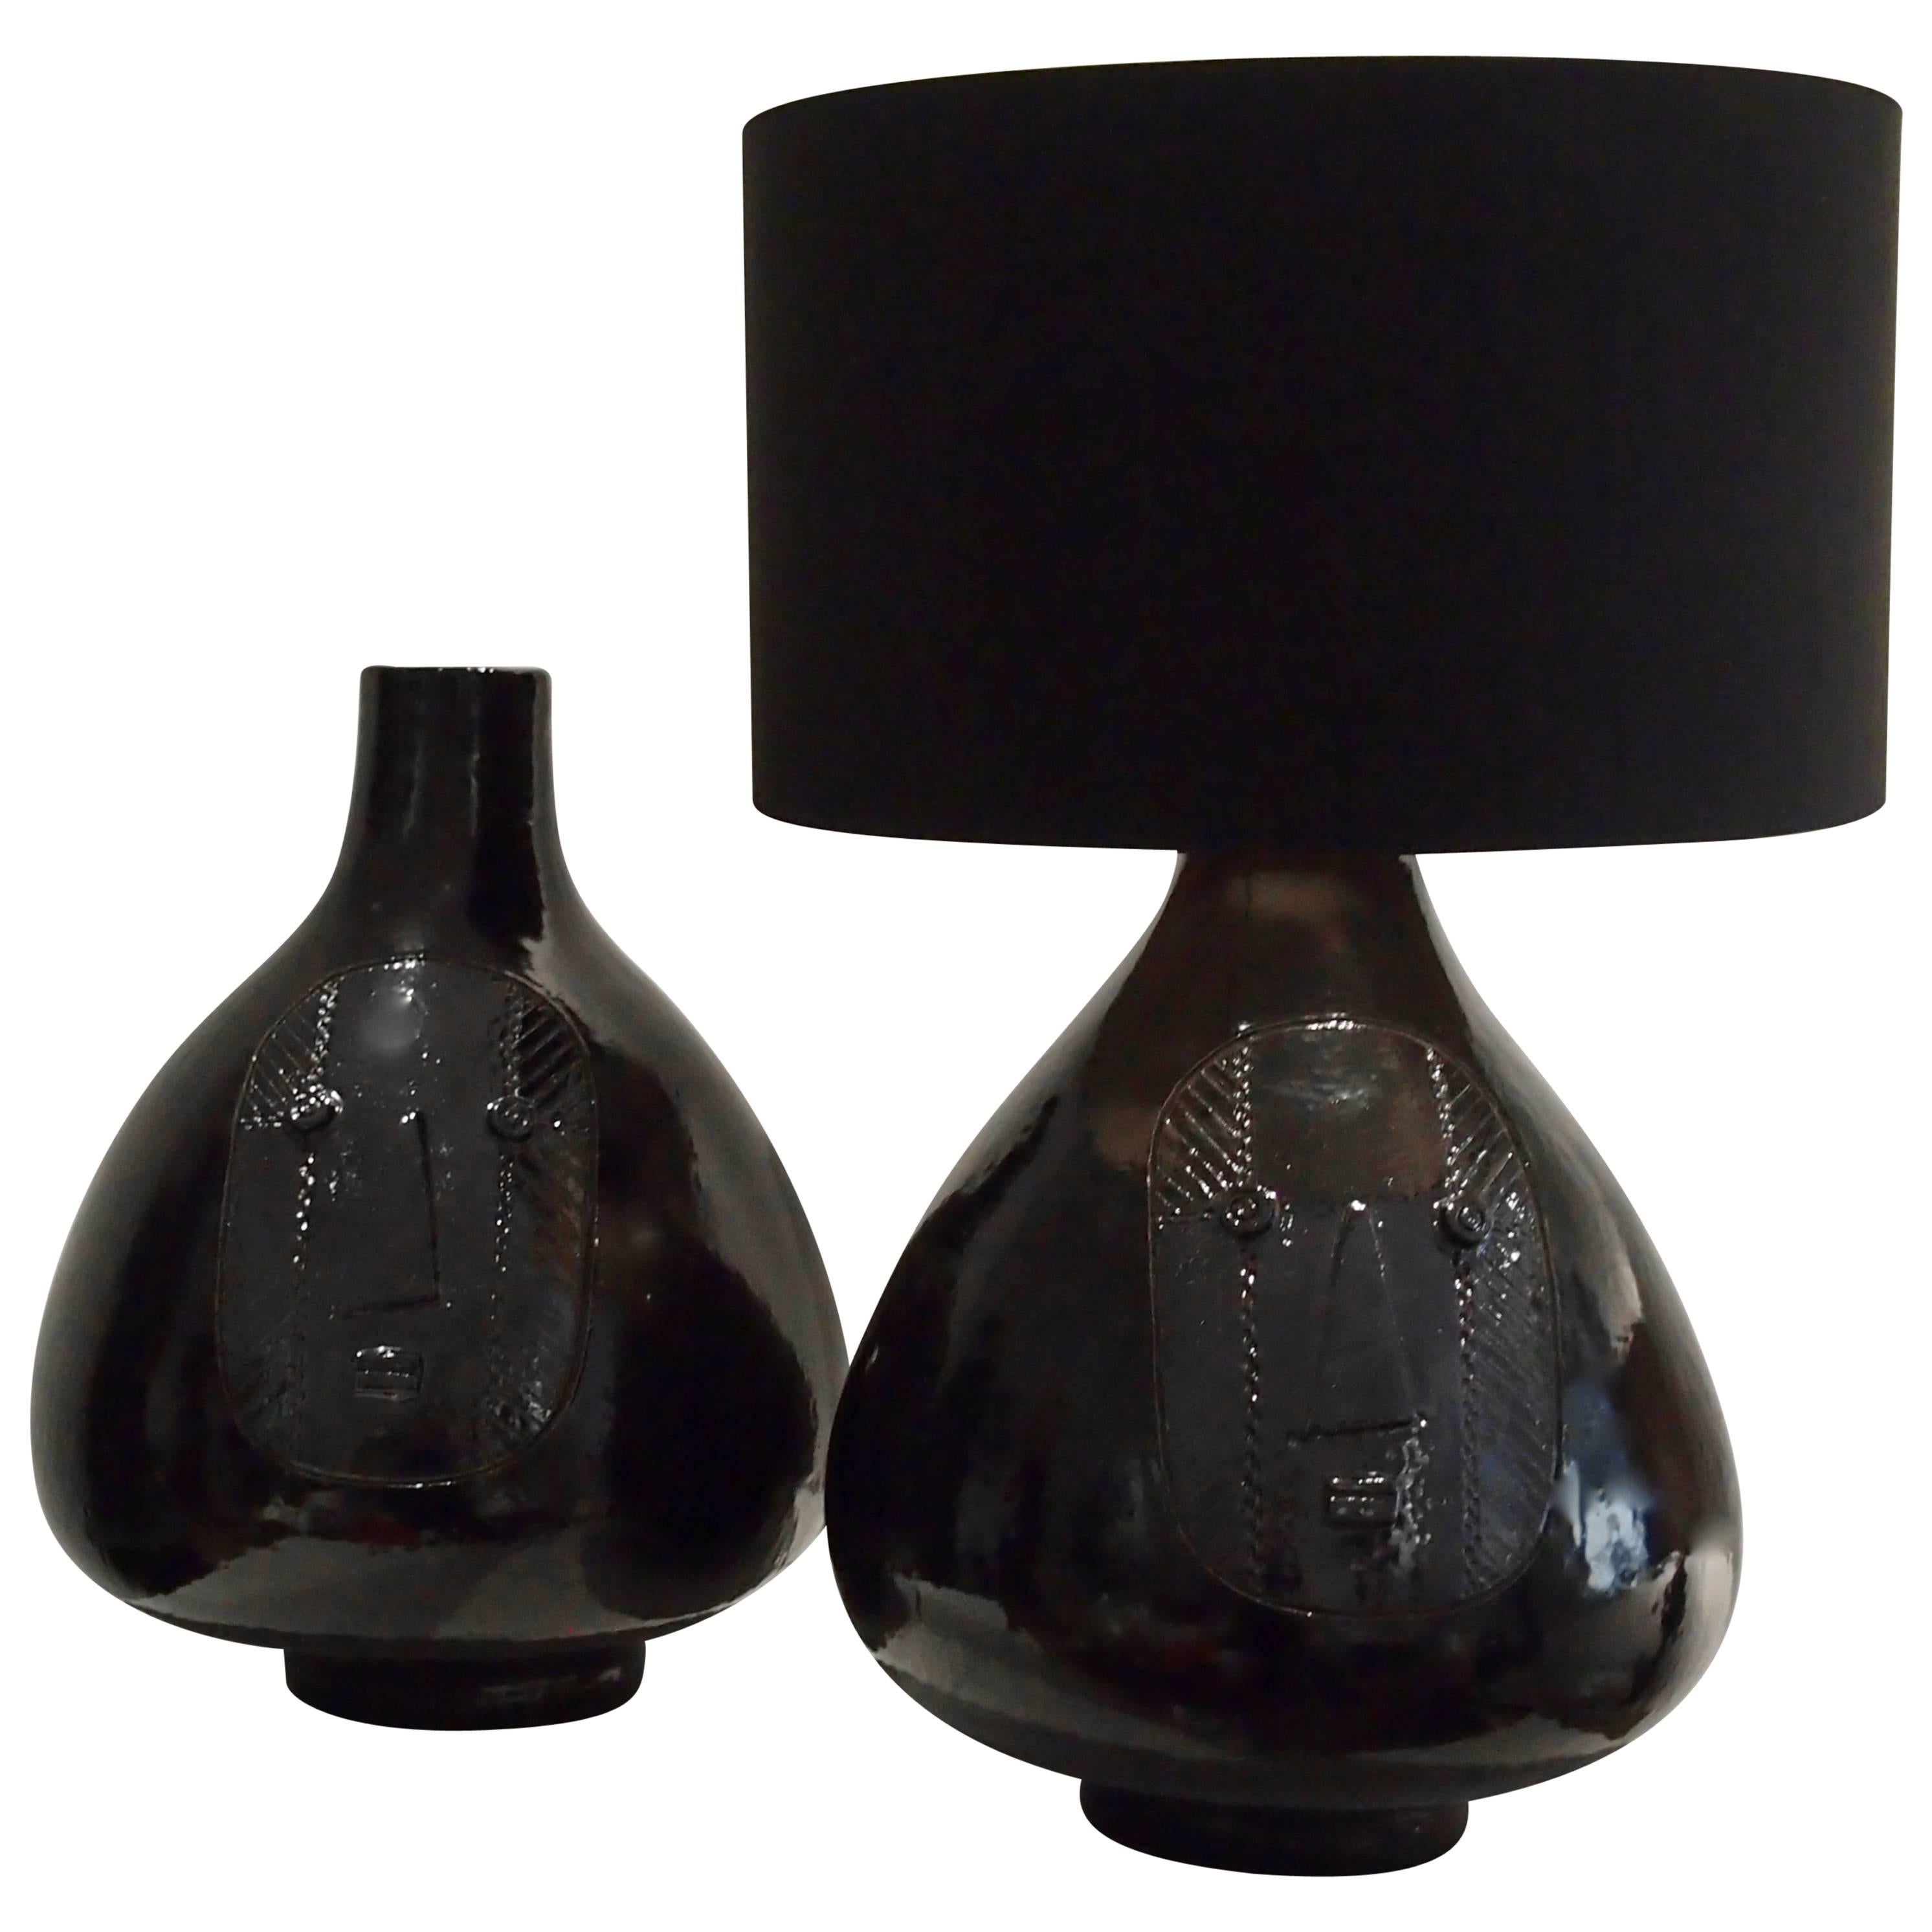 Large Pair of Ceramic Lamp Bases Glazed in Black signed by DaLo